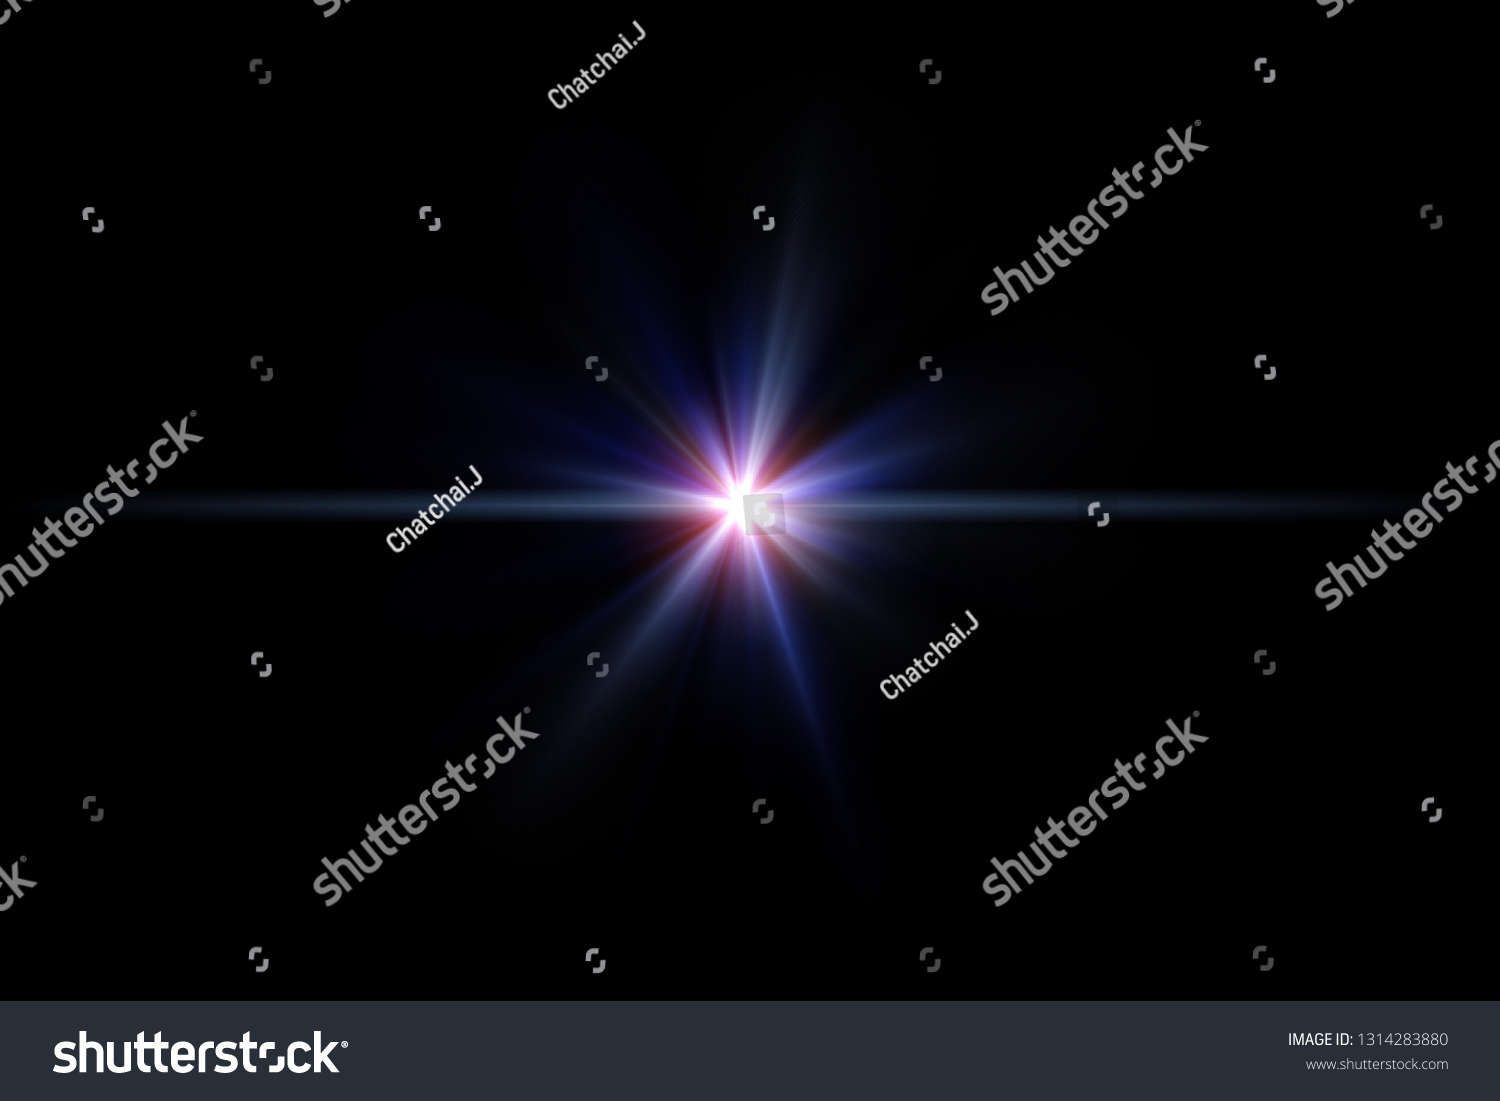 Star flare or Lens flare #1314283880